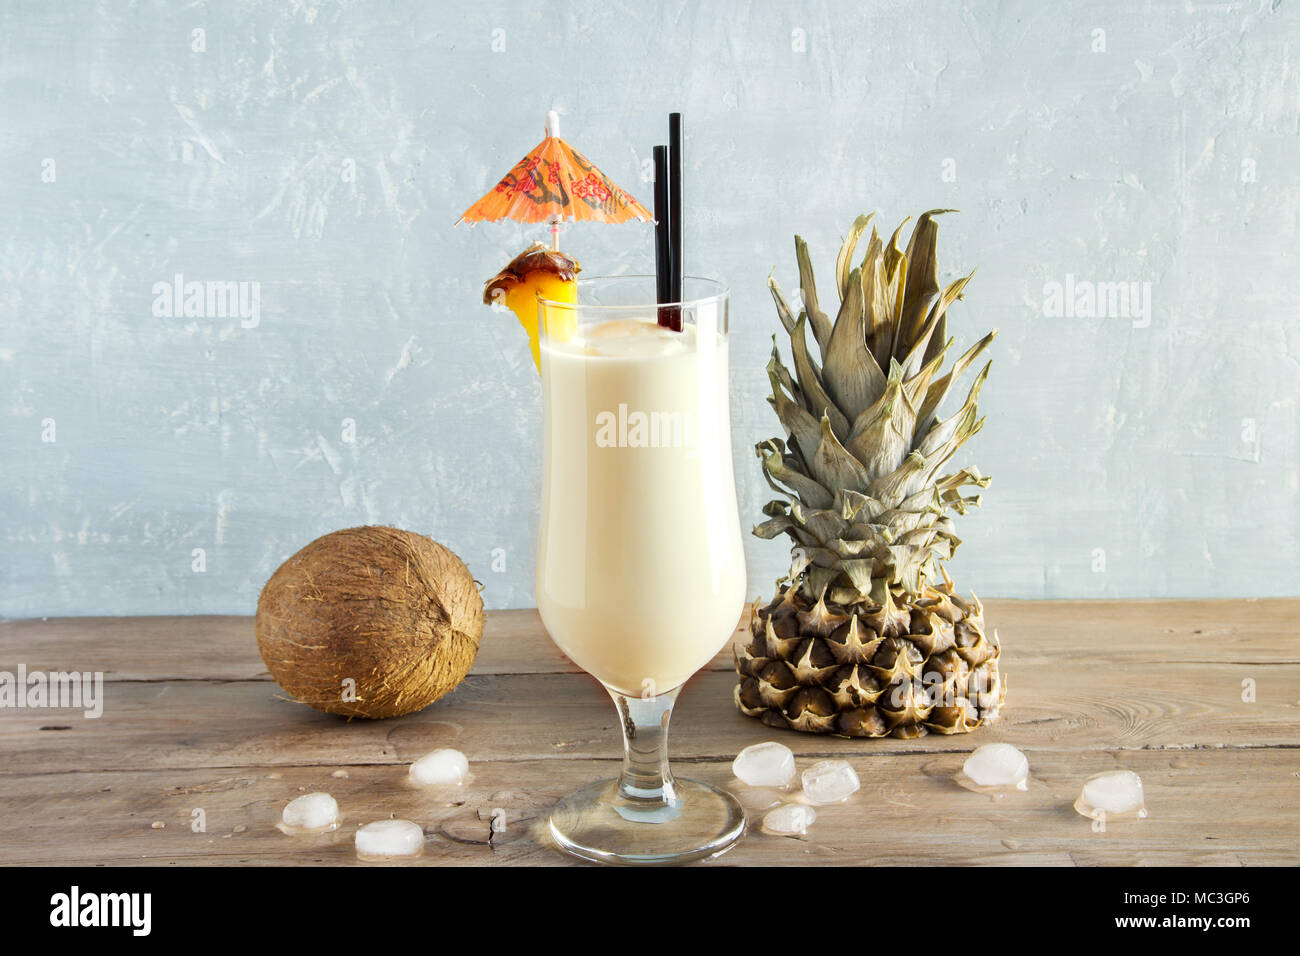 Pina Colada Cocktail with pineapple and coconut over wooden background, copy space. Summer tropical delicious cocktail. Stock Photo